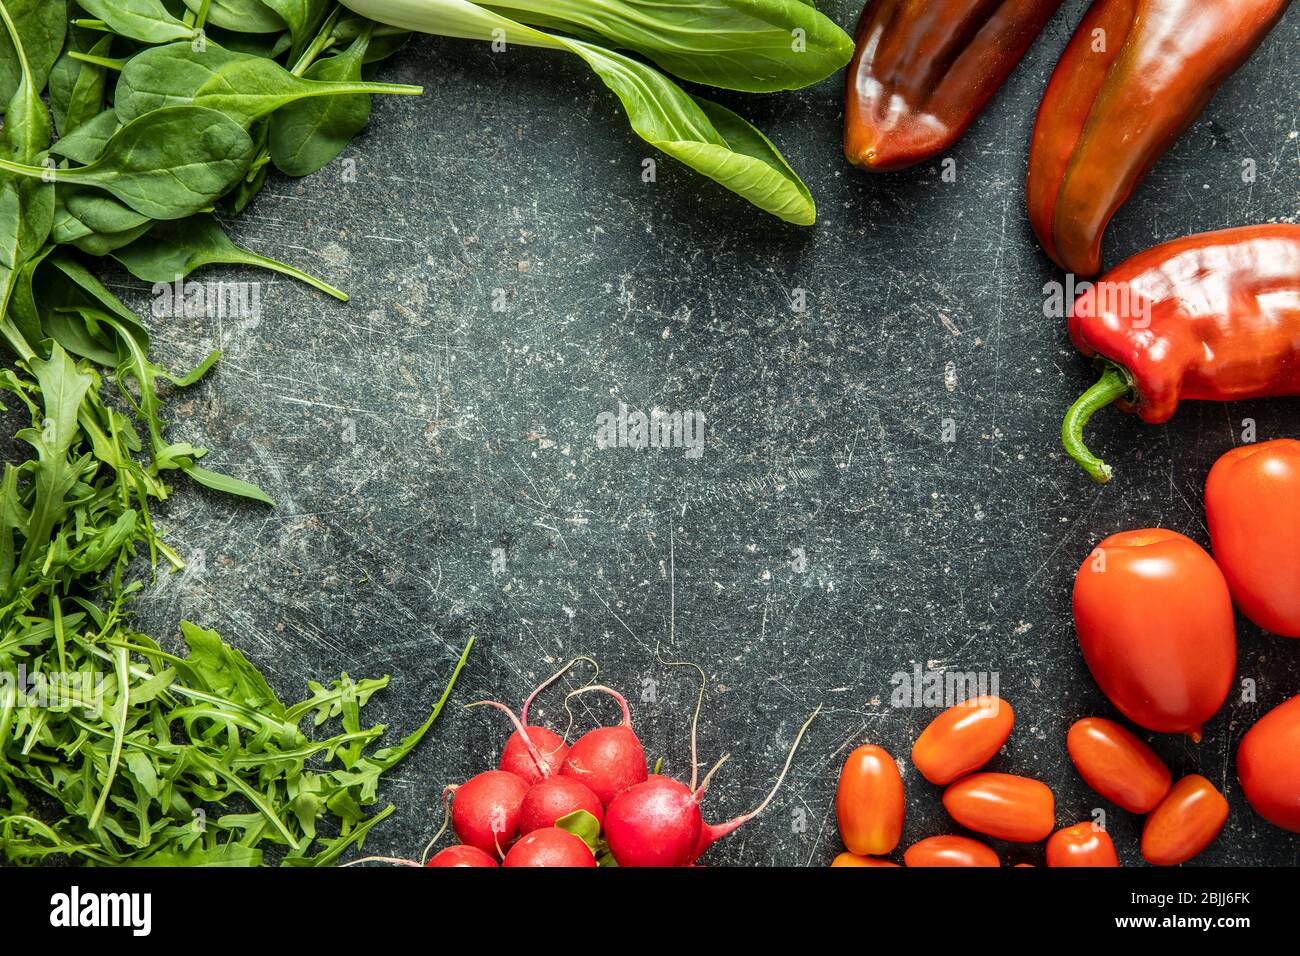 Different vegetables. Arugula, radishes, spinach, red peppers, tomatoes and pak choi on kitchen table. Top view. Stock Photo